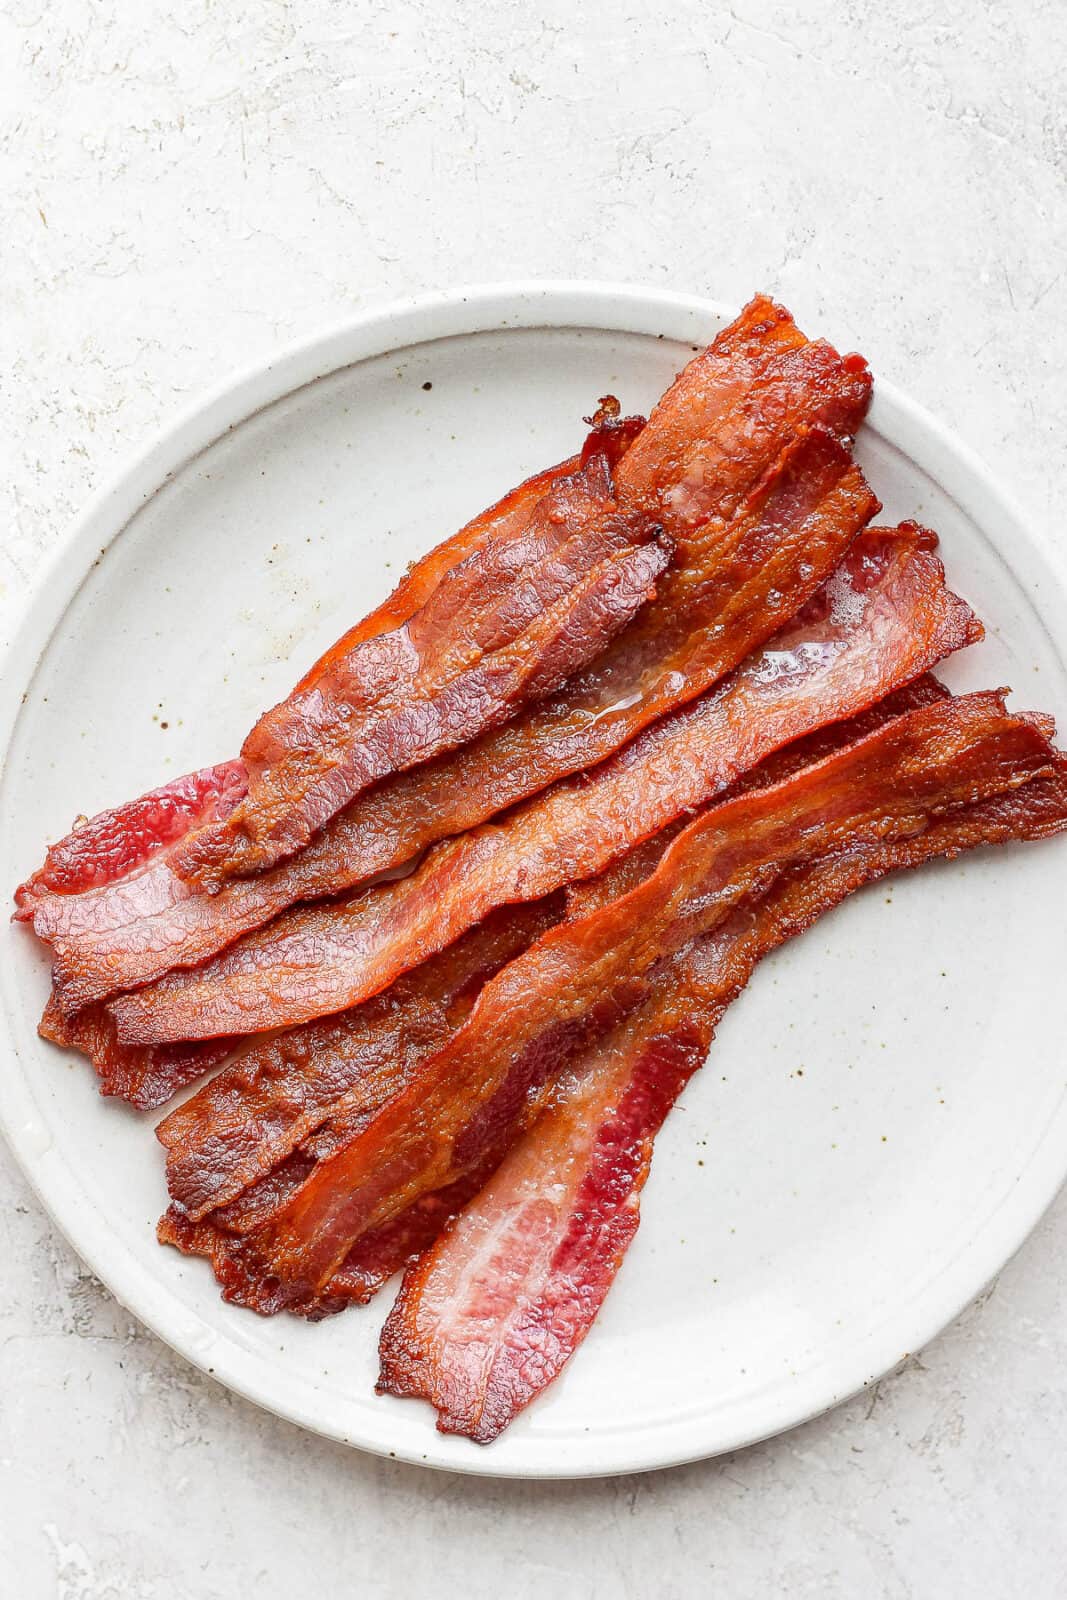 A plate of bacon after baking in the oven.